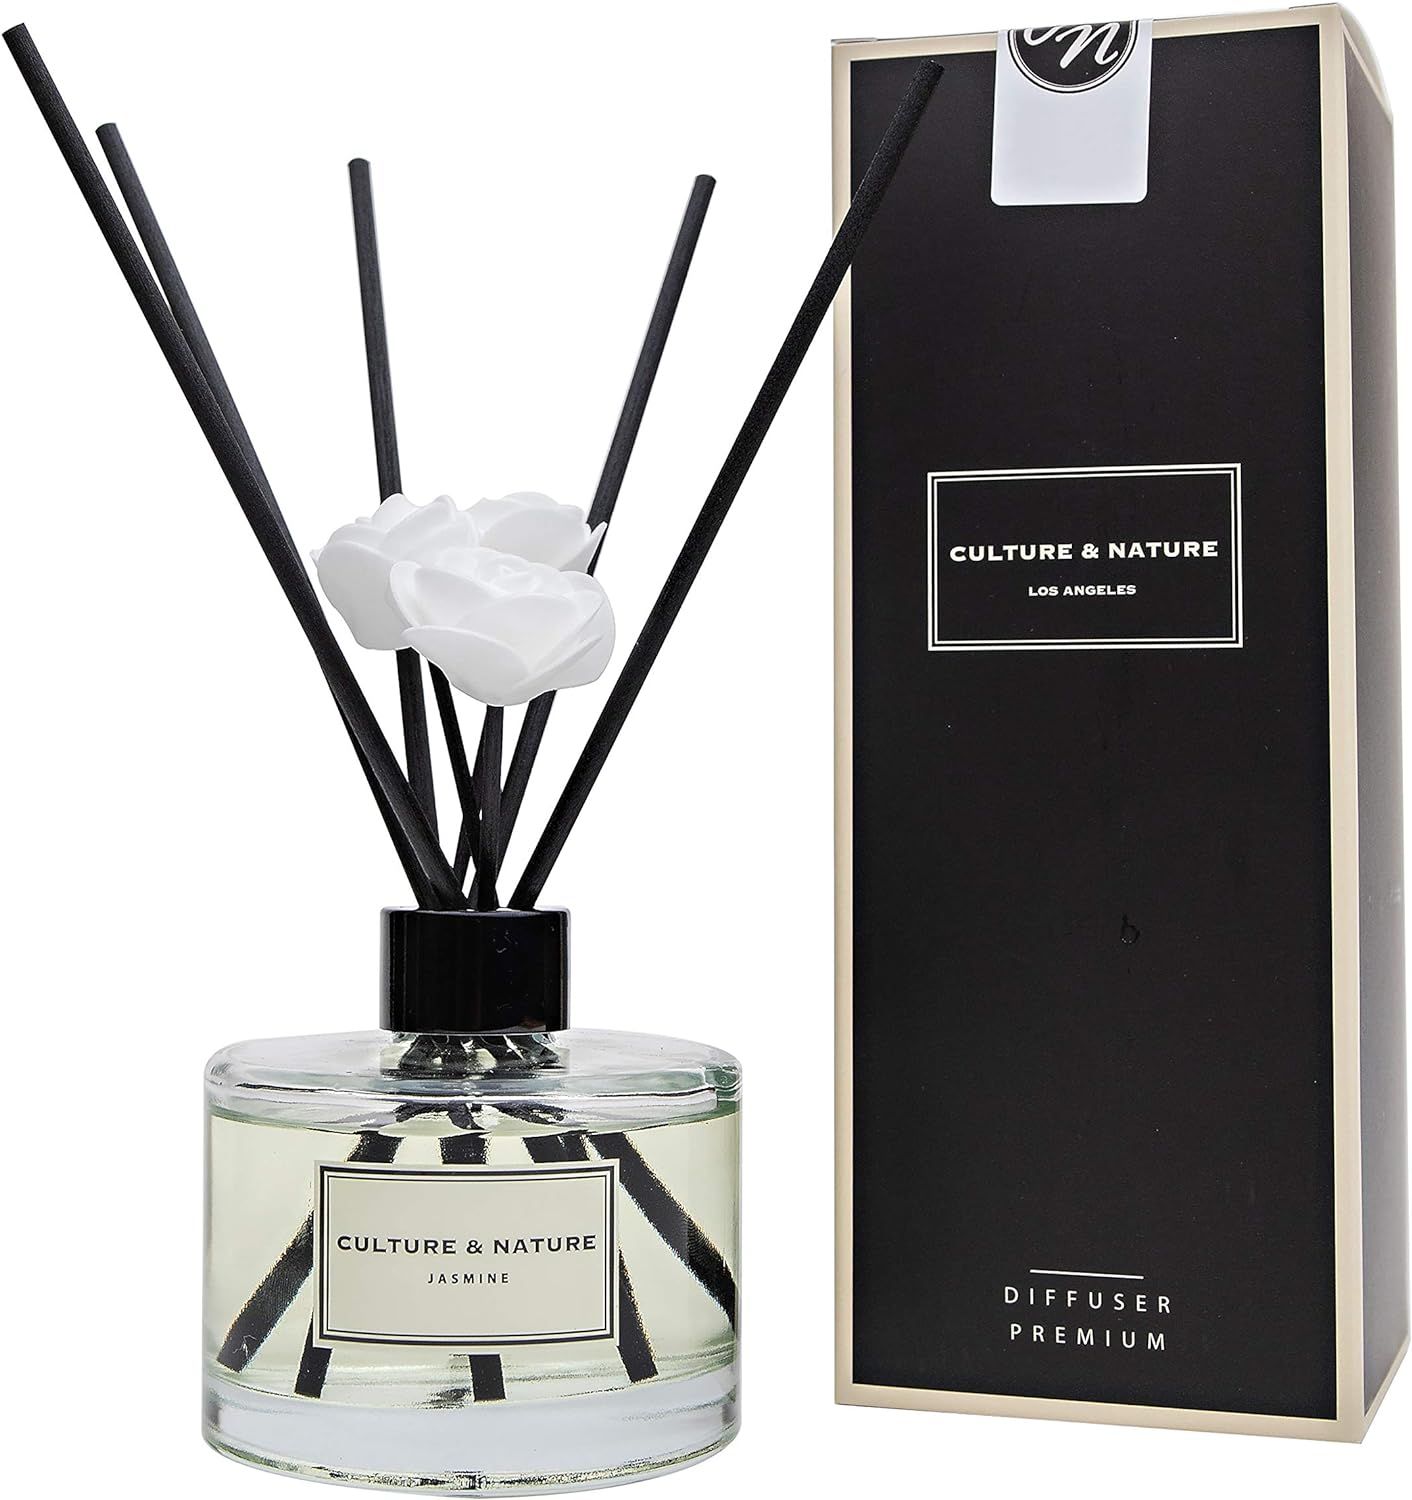 CULTURE & NATURE Reed Diffuser 6.7 oz (200ml) Jasmine Scented Reed Diffuser Set | Amazon (US)